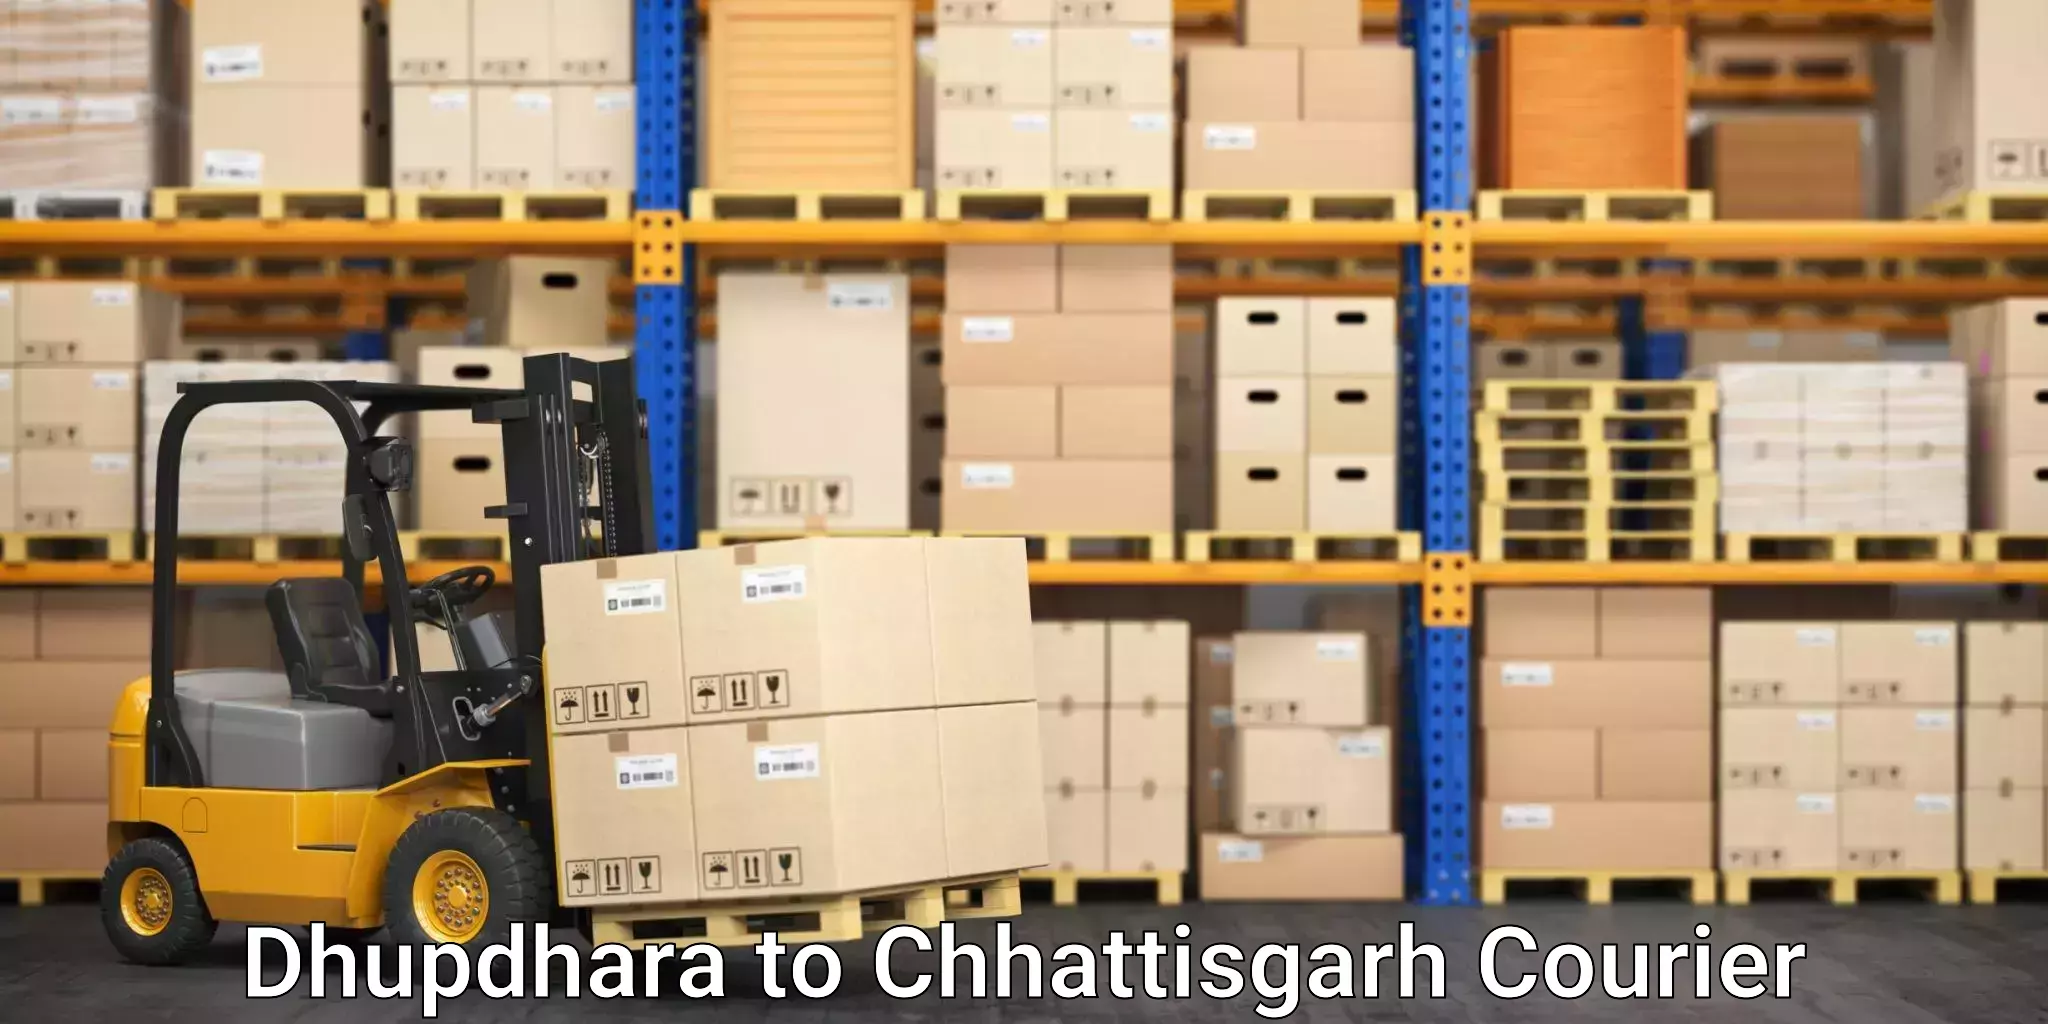 Easy access courier services in Dhupdhara to bagbahra